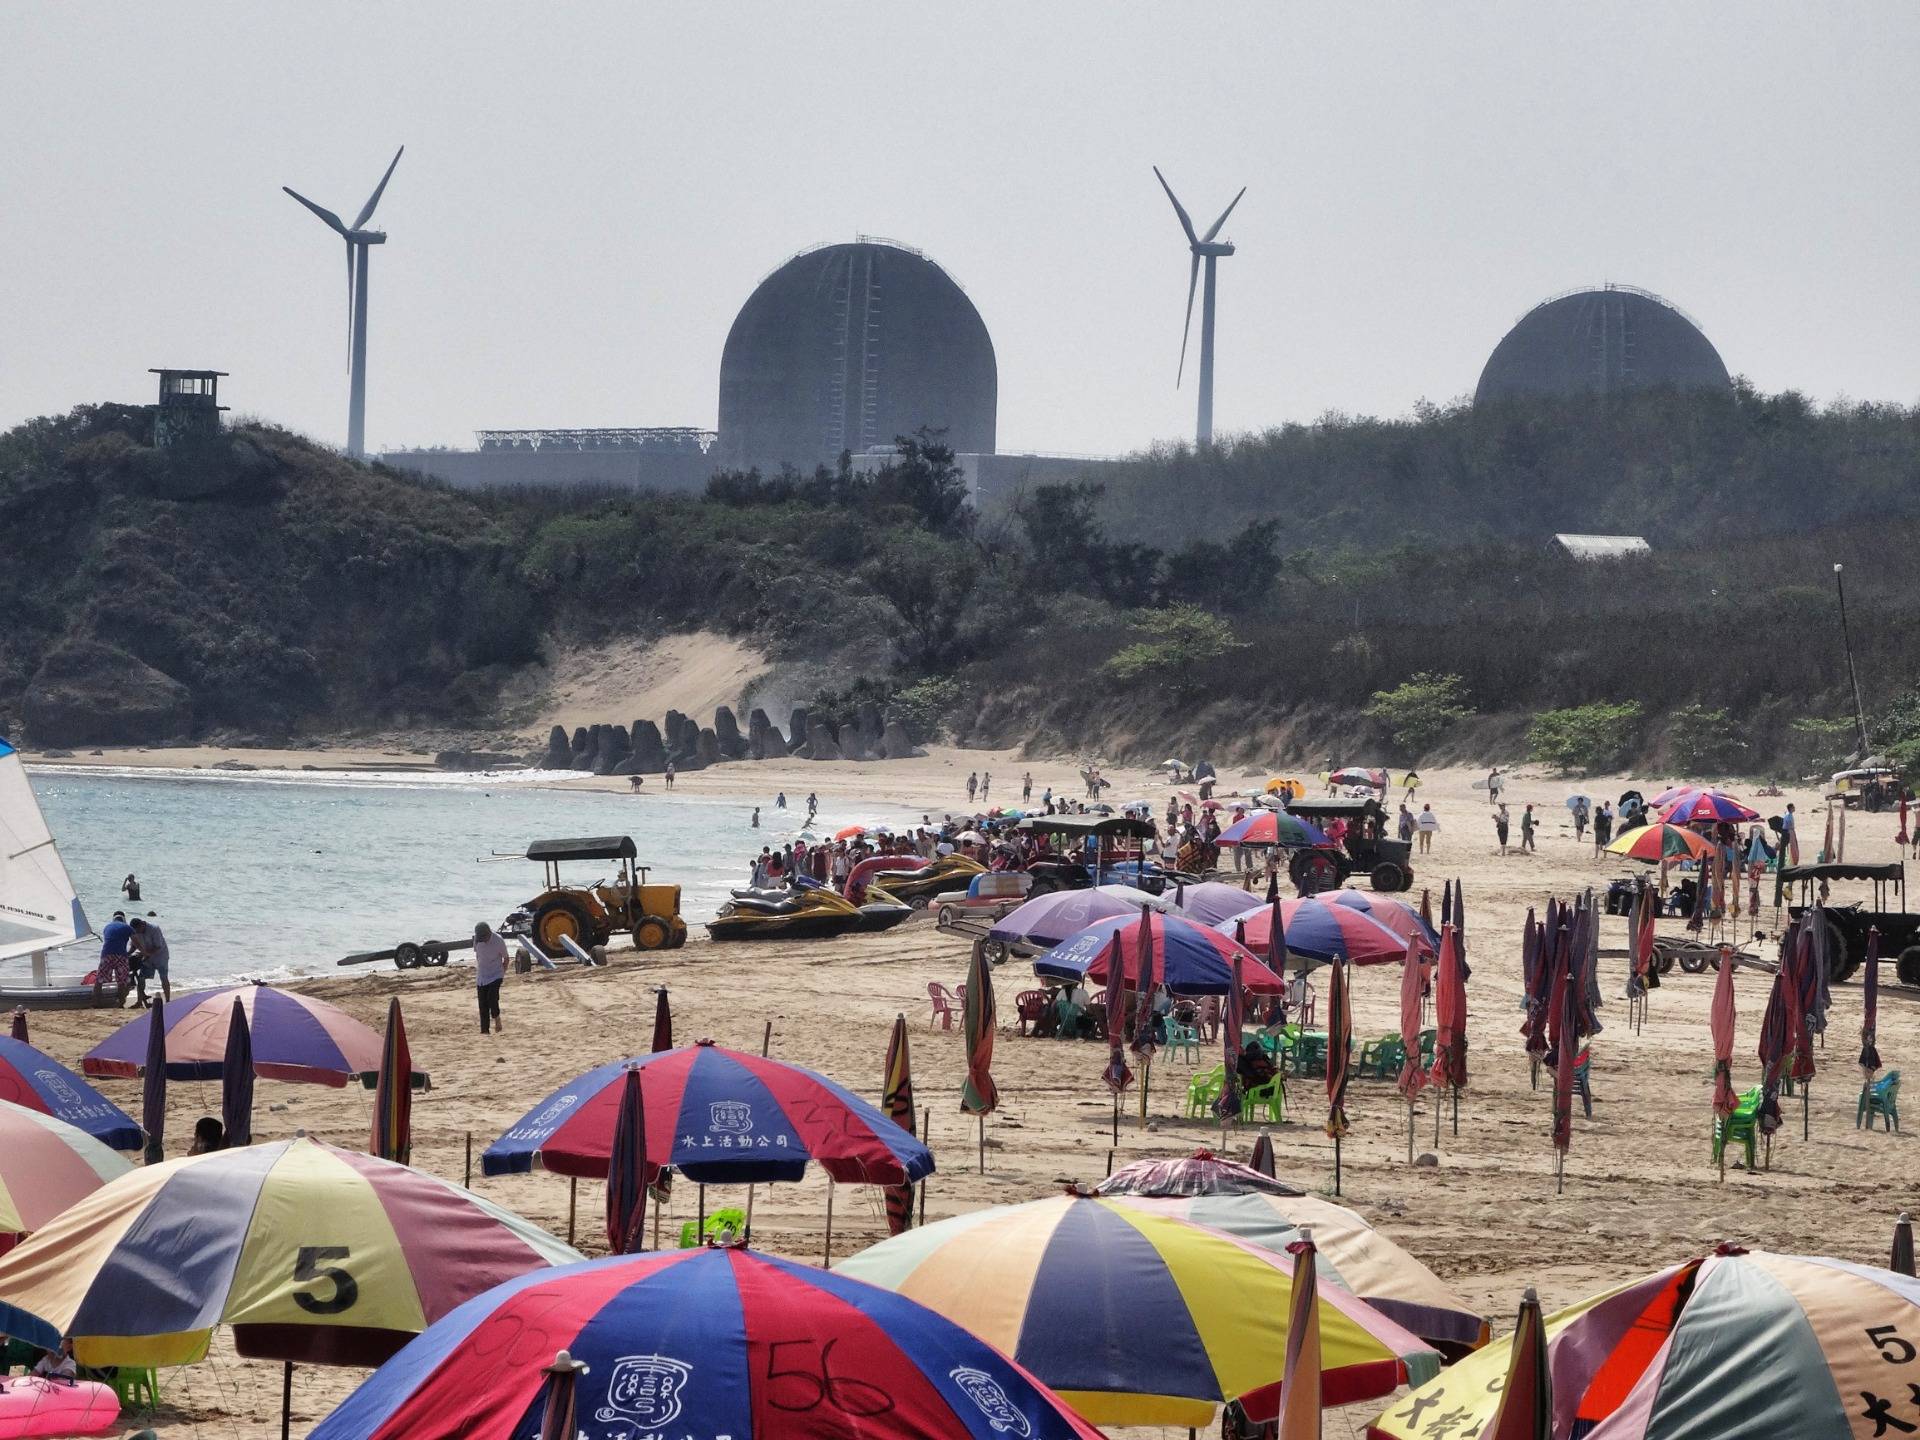 Strange beach: Bathing in the shadow of a nuclear power plant.